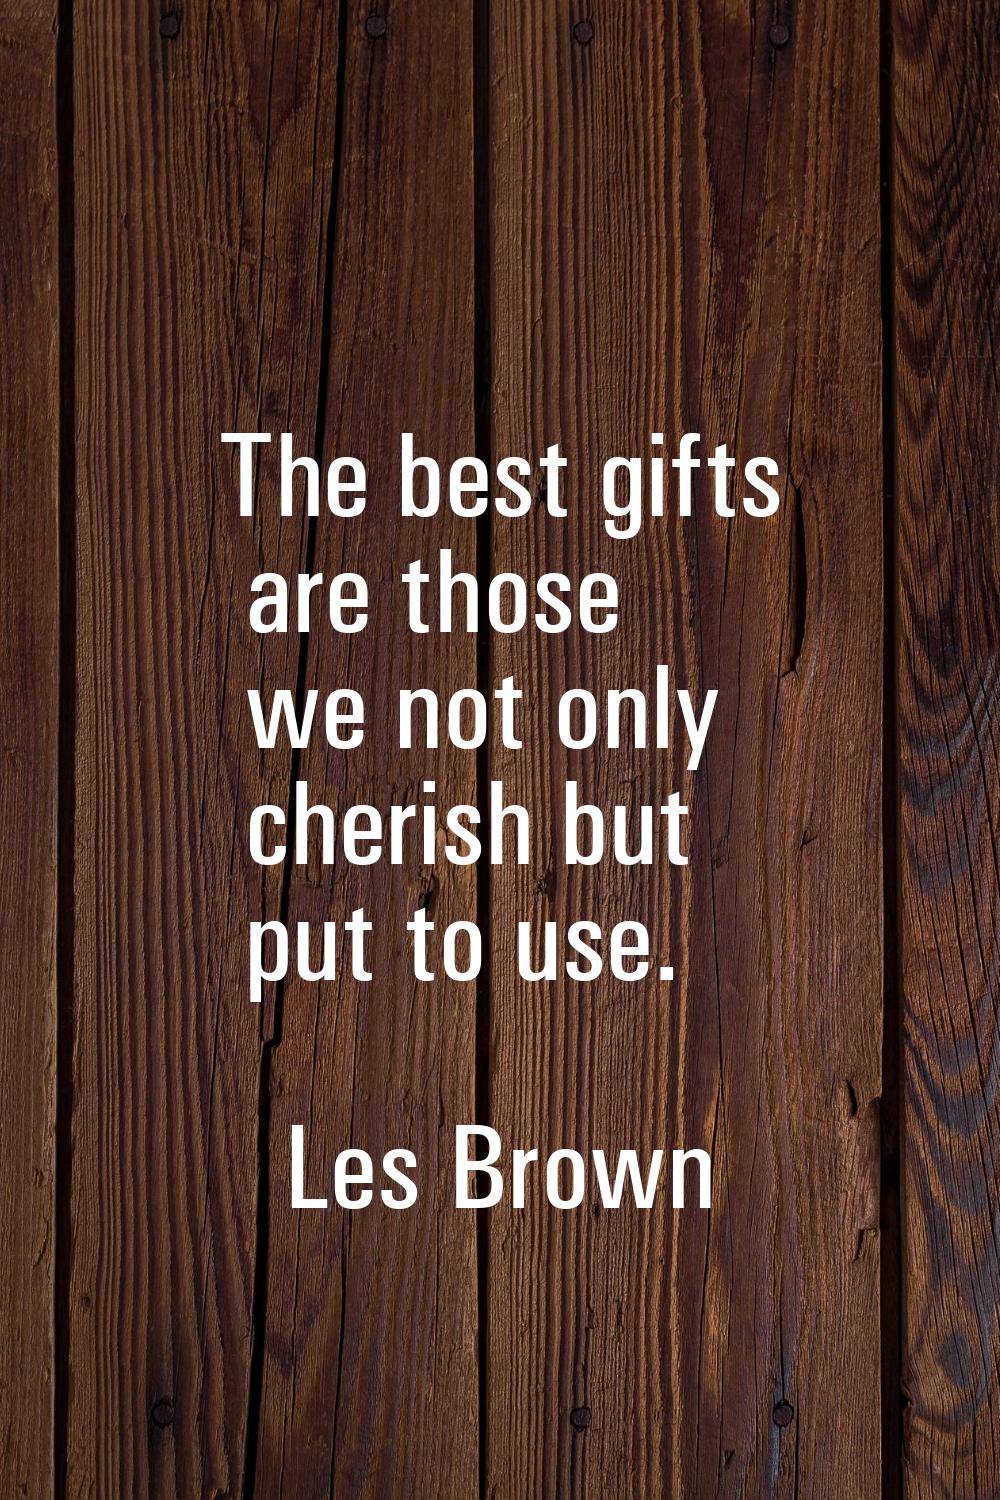 The best gifts are those we not only cherish but put to use.